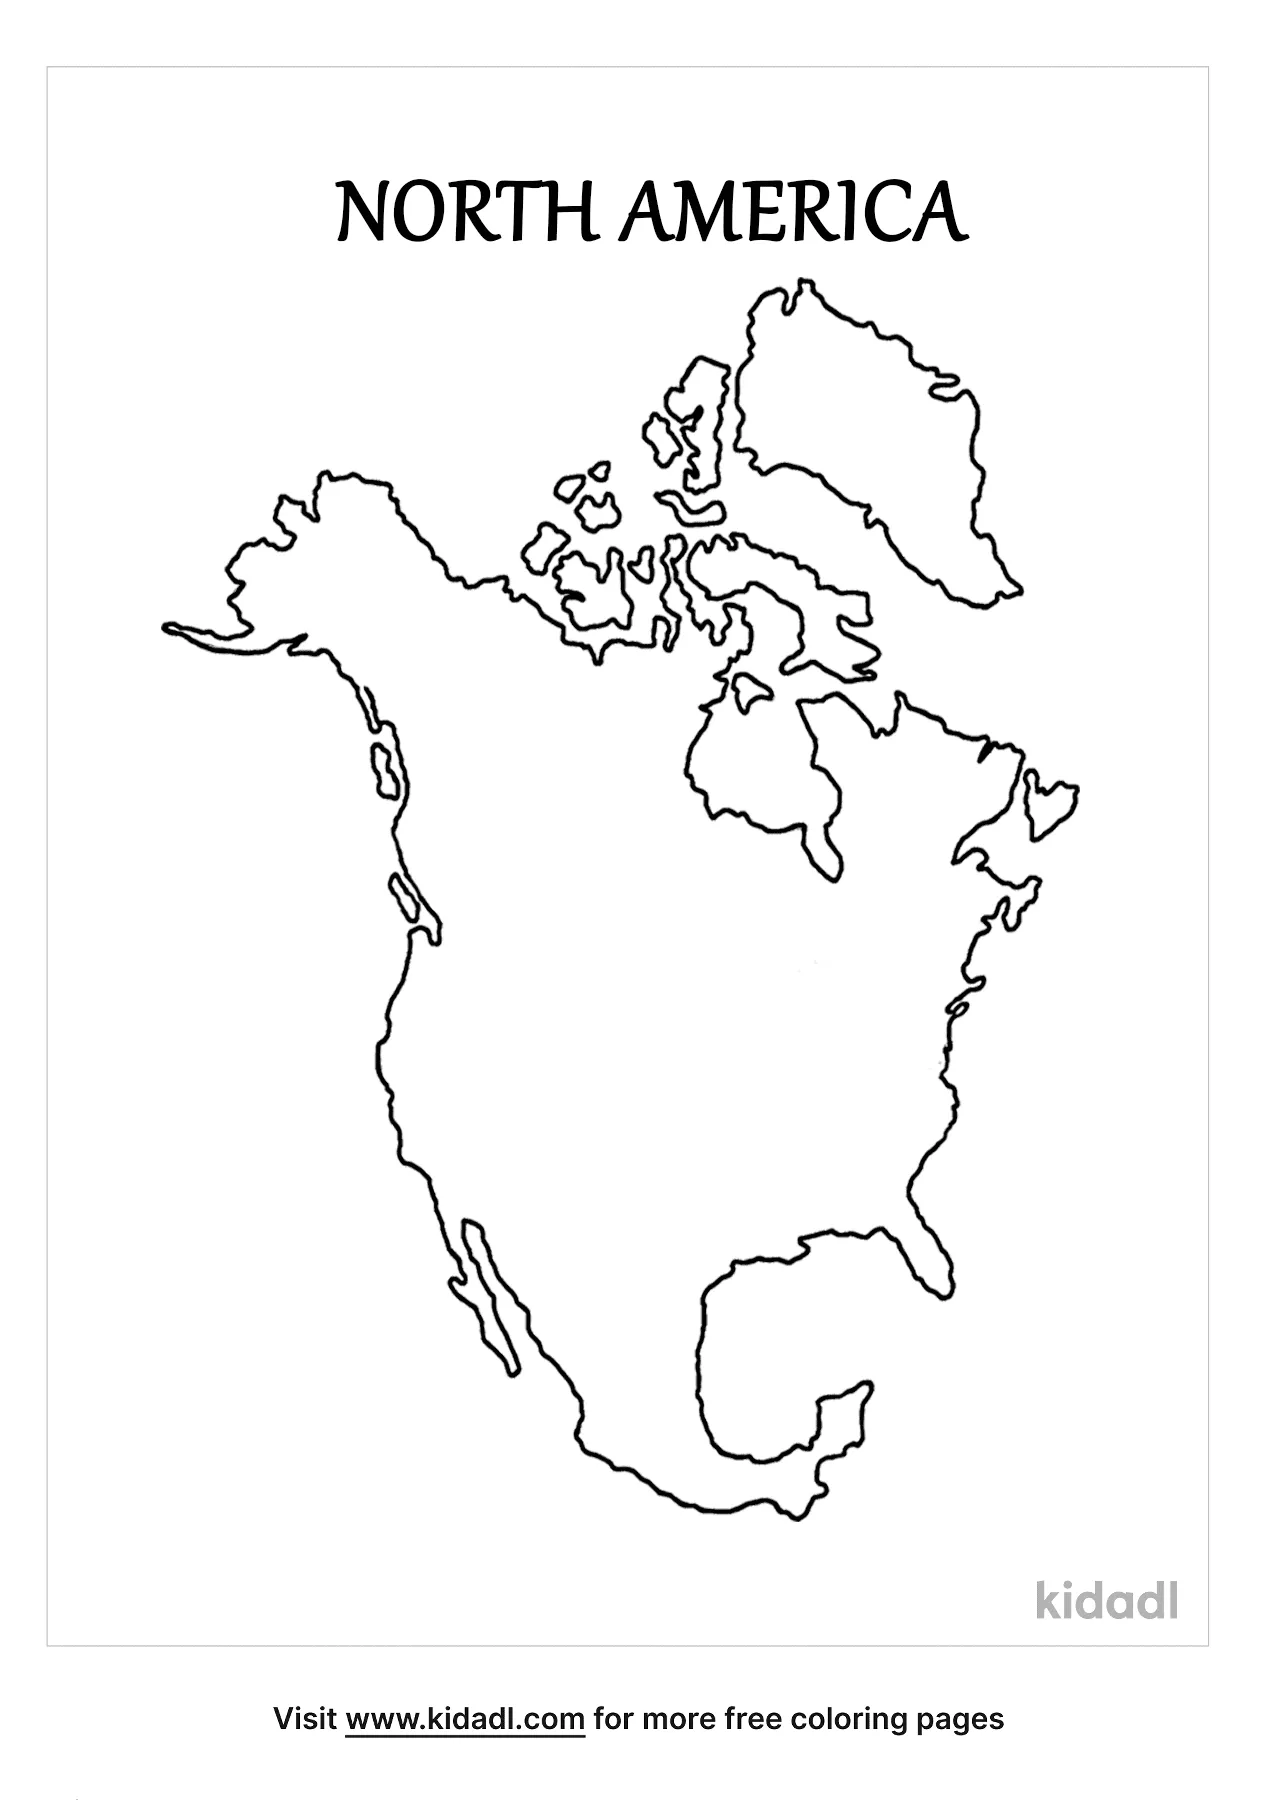 Free north america map coloring page coloring page printables